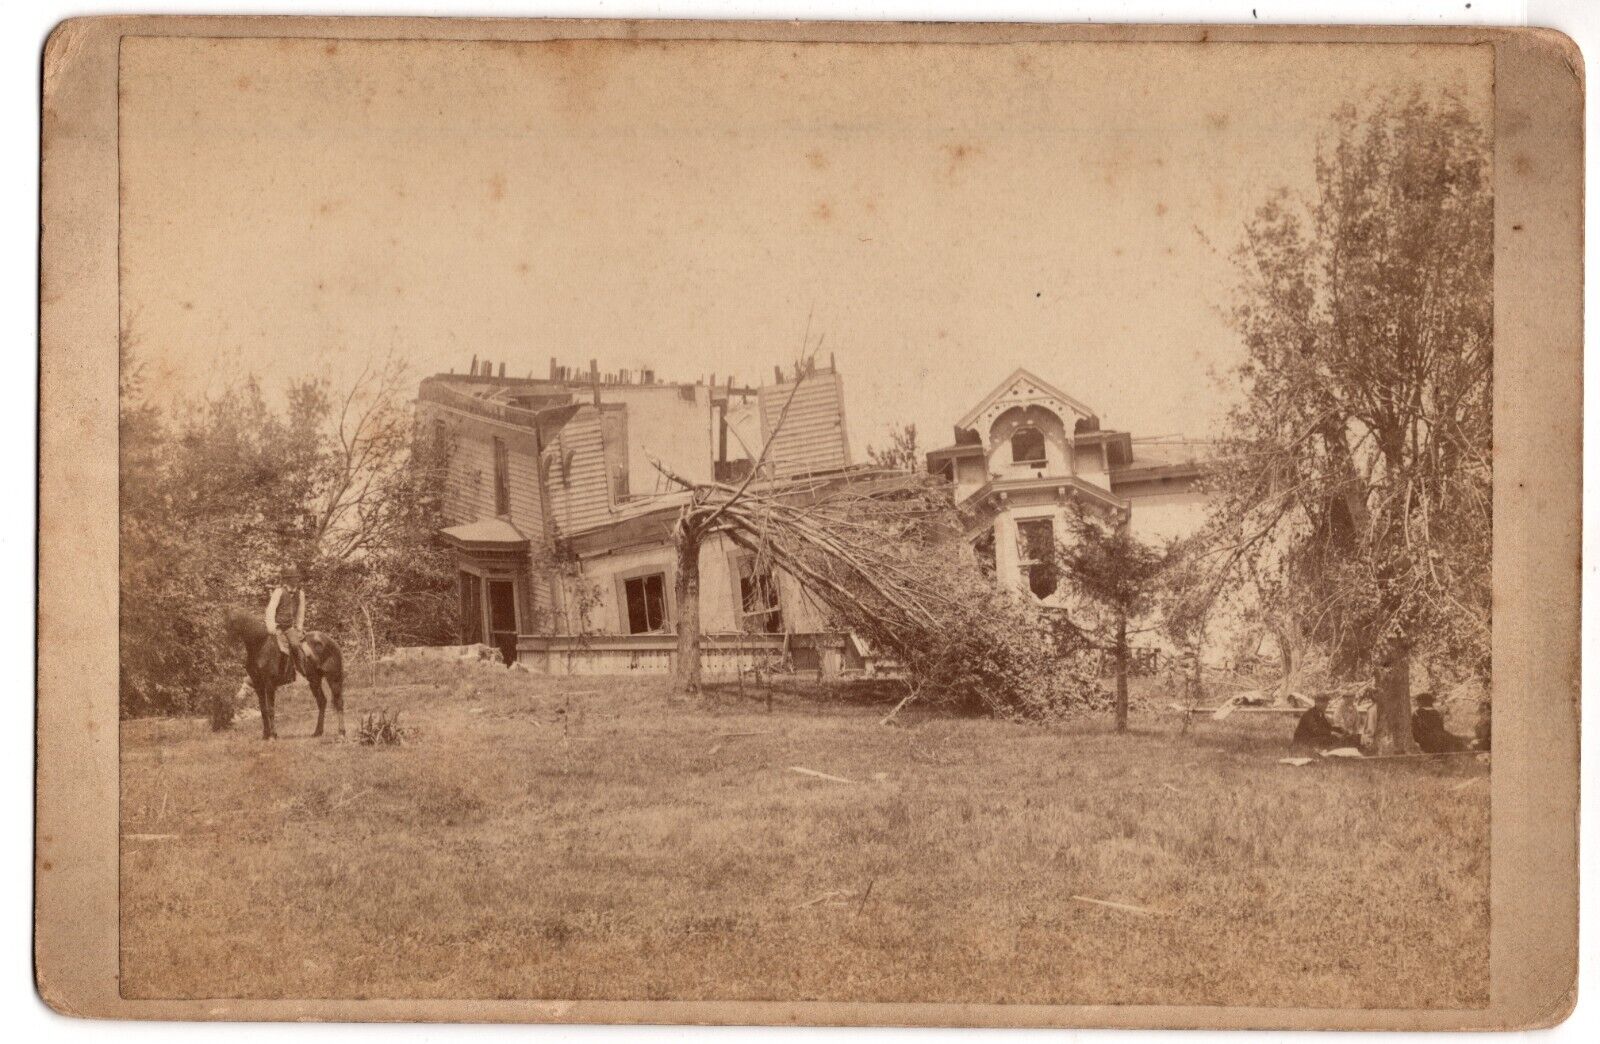 C. 1880s CABINET CARD AFTERMATH OF TORNADO THAT TORE THROUGH HOUSE GRINELL IOWA